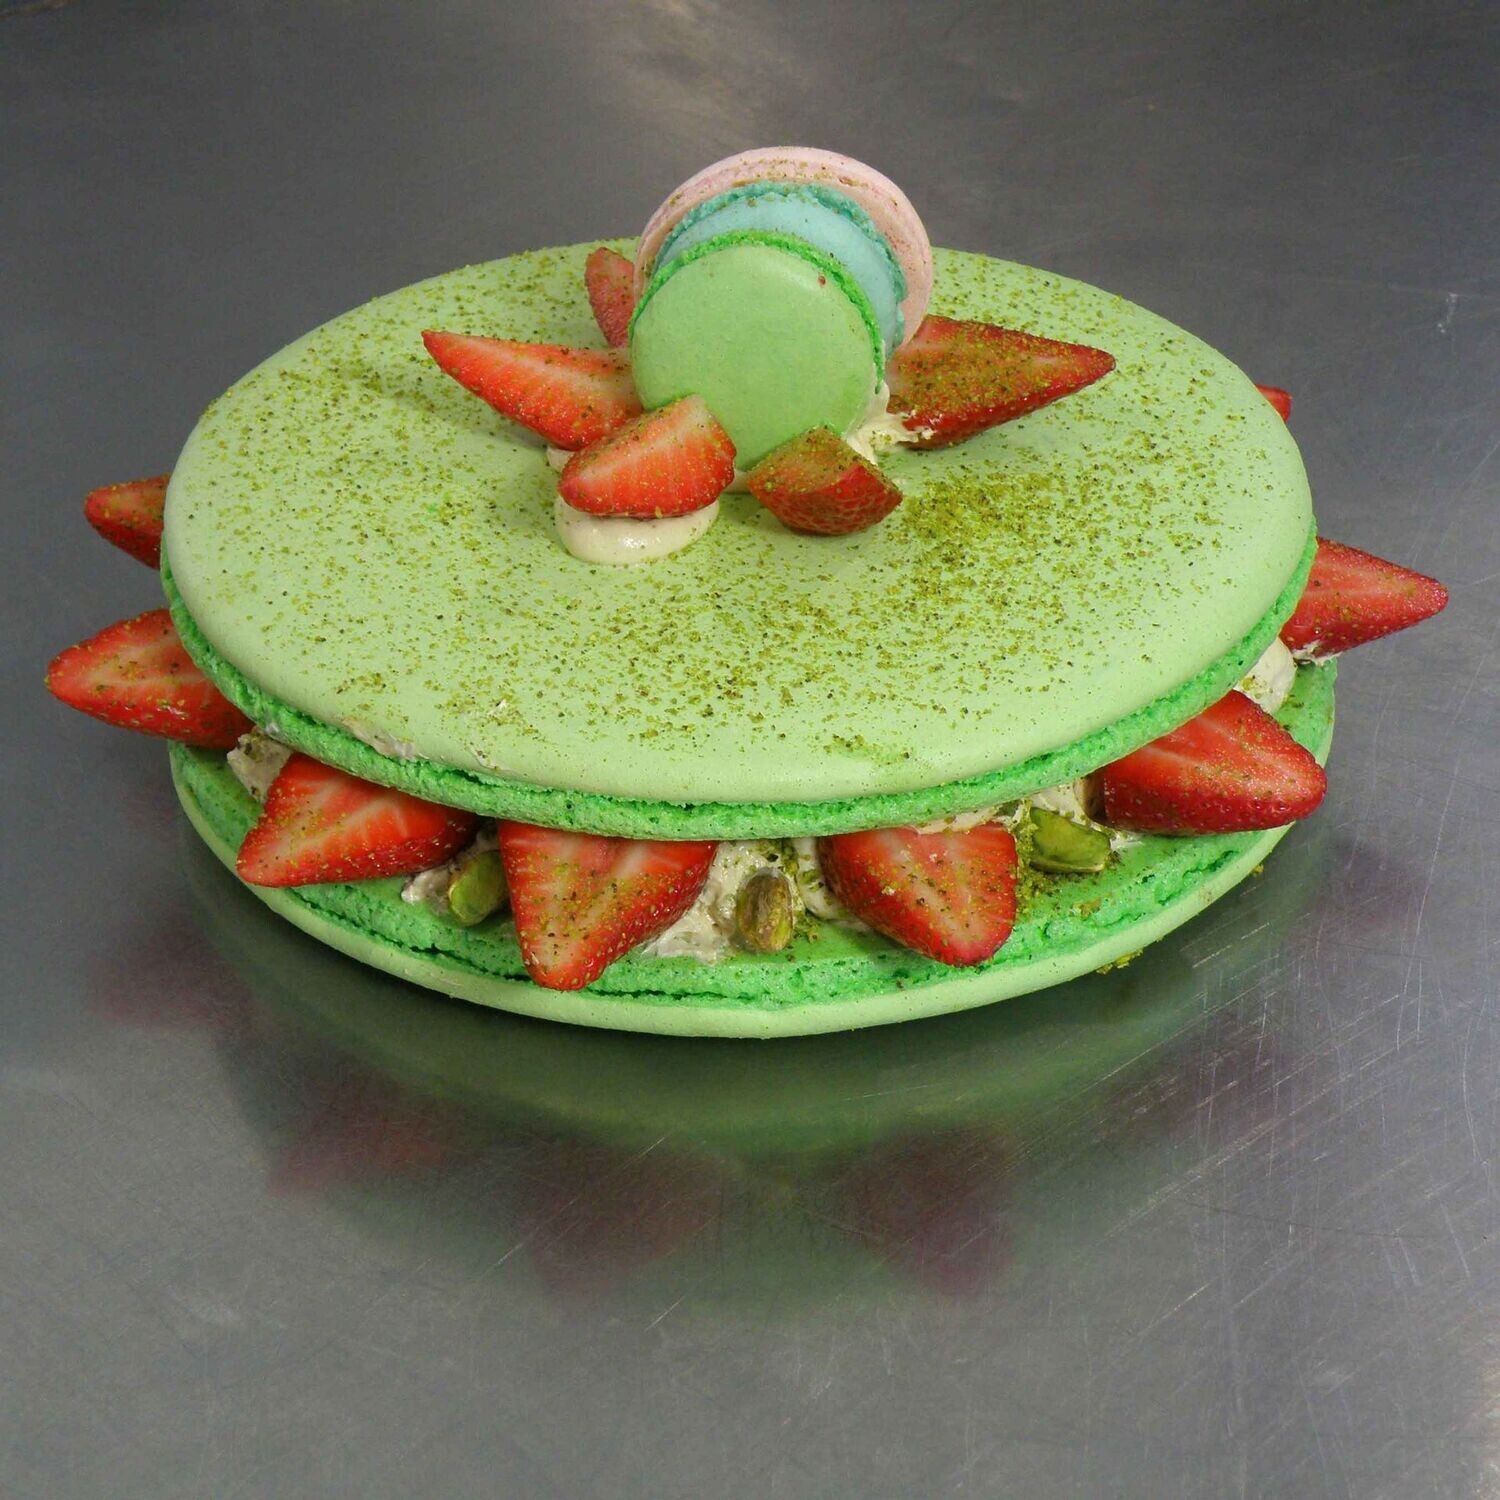 Single Layer Macaroon Cake: up to approximately 4 - 6 portions